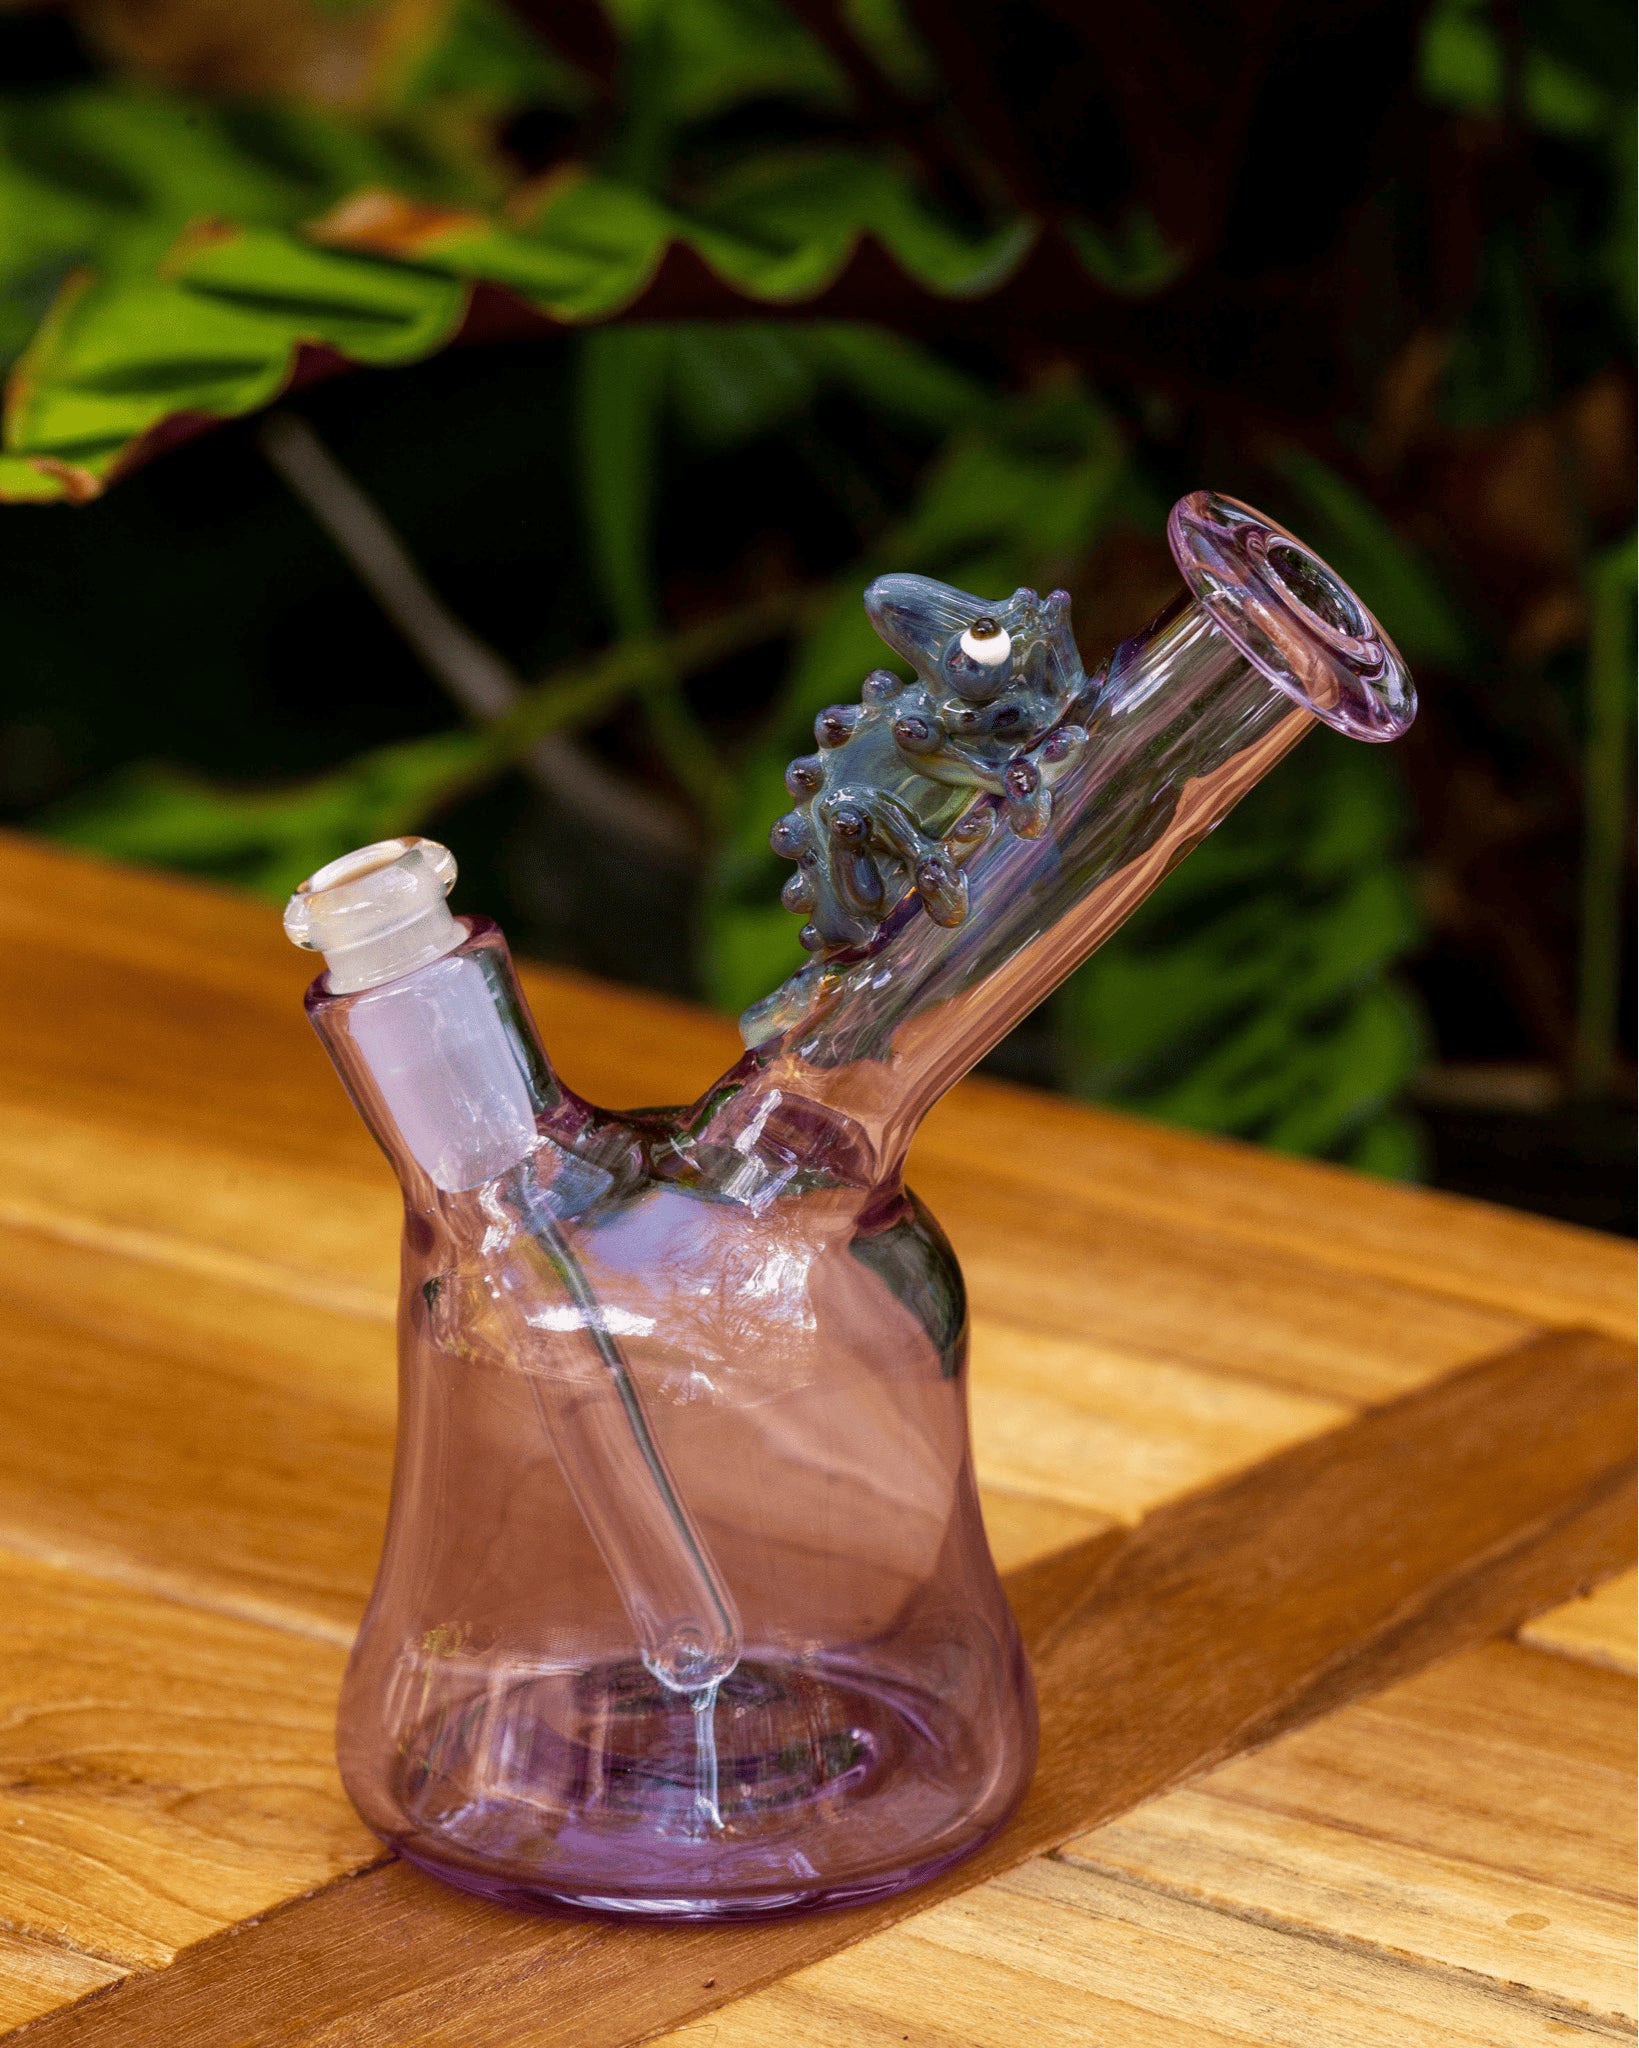 innovative design of the Purple Color Rig w/ Chameleon (B) by Willy That Glass Guy